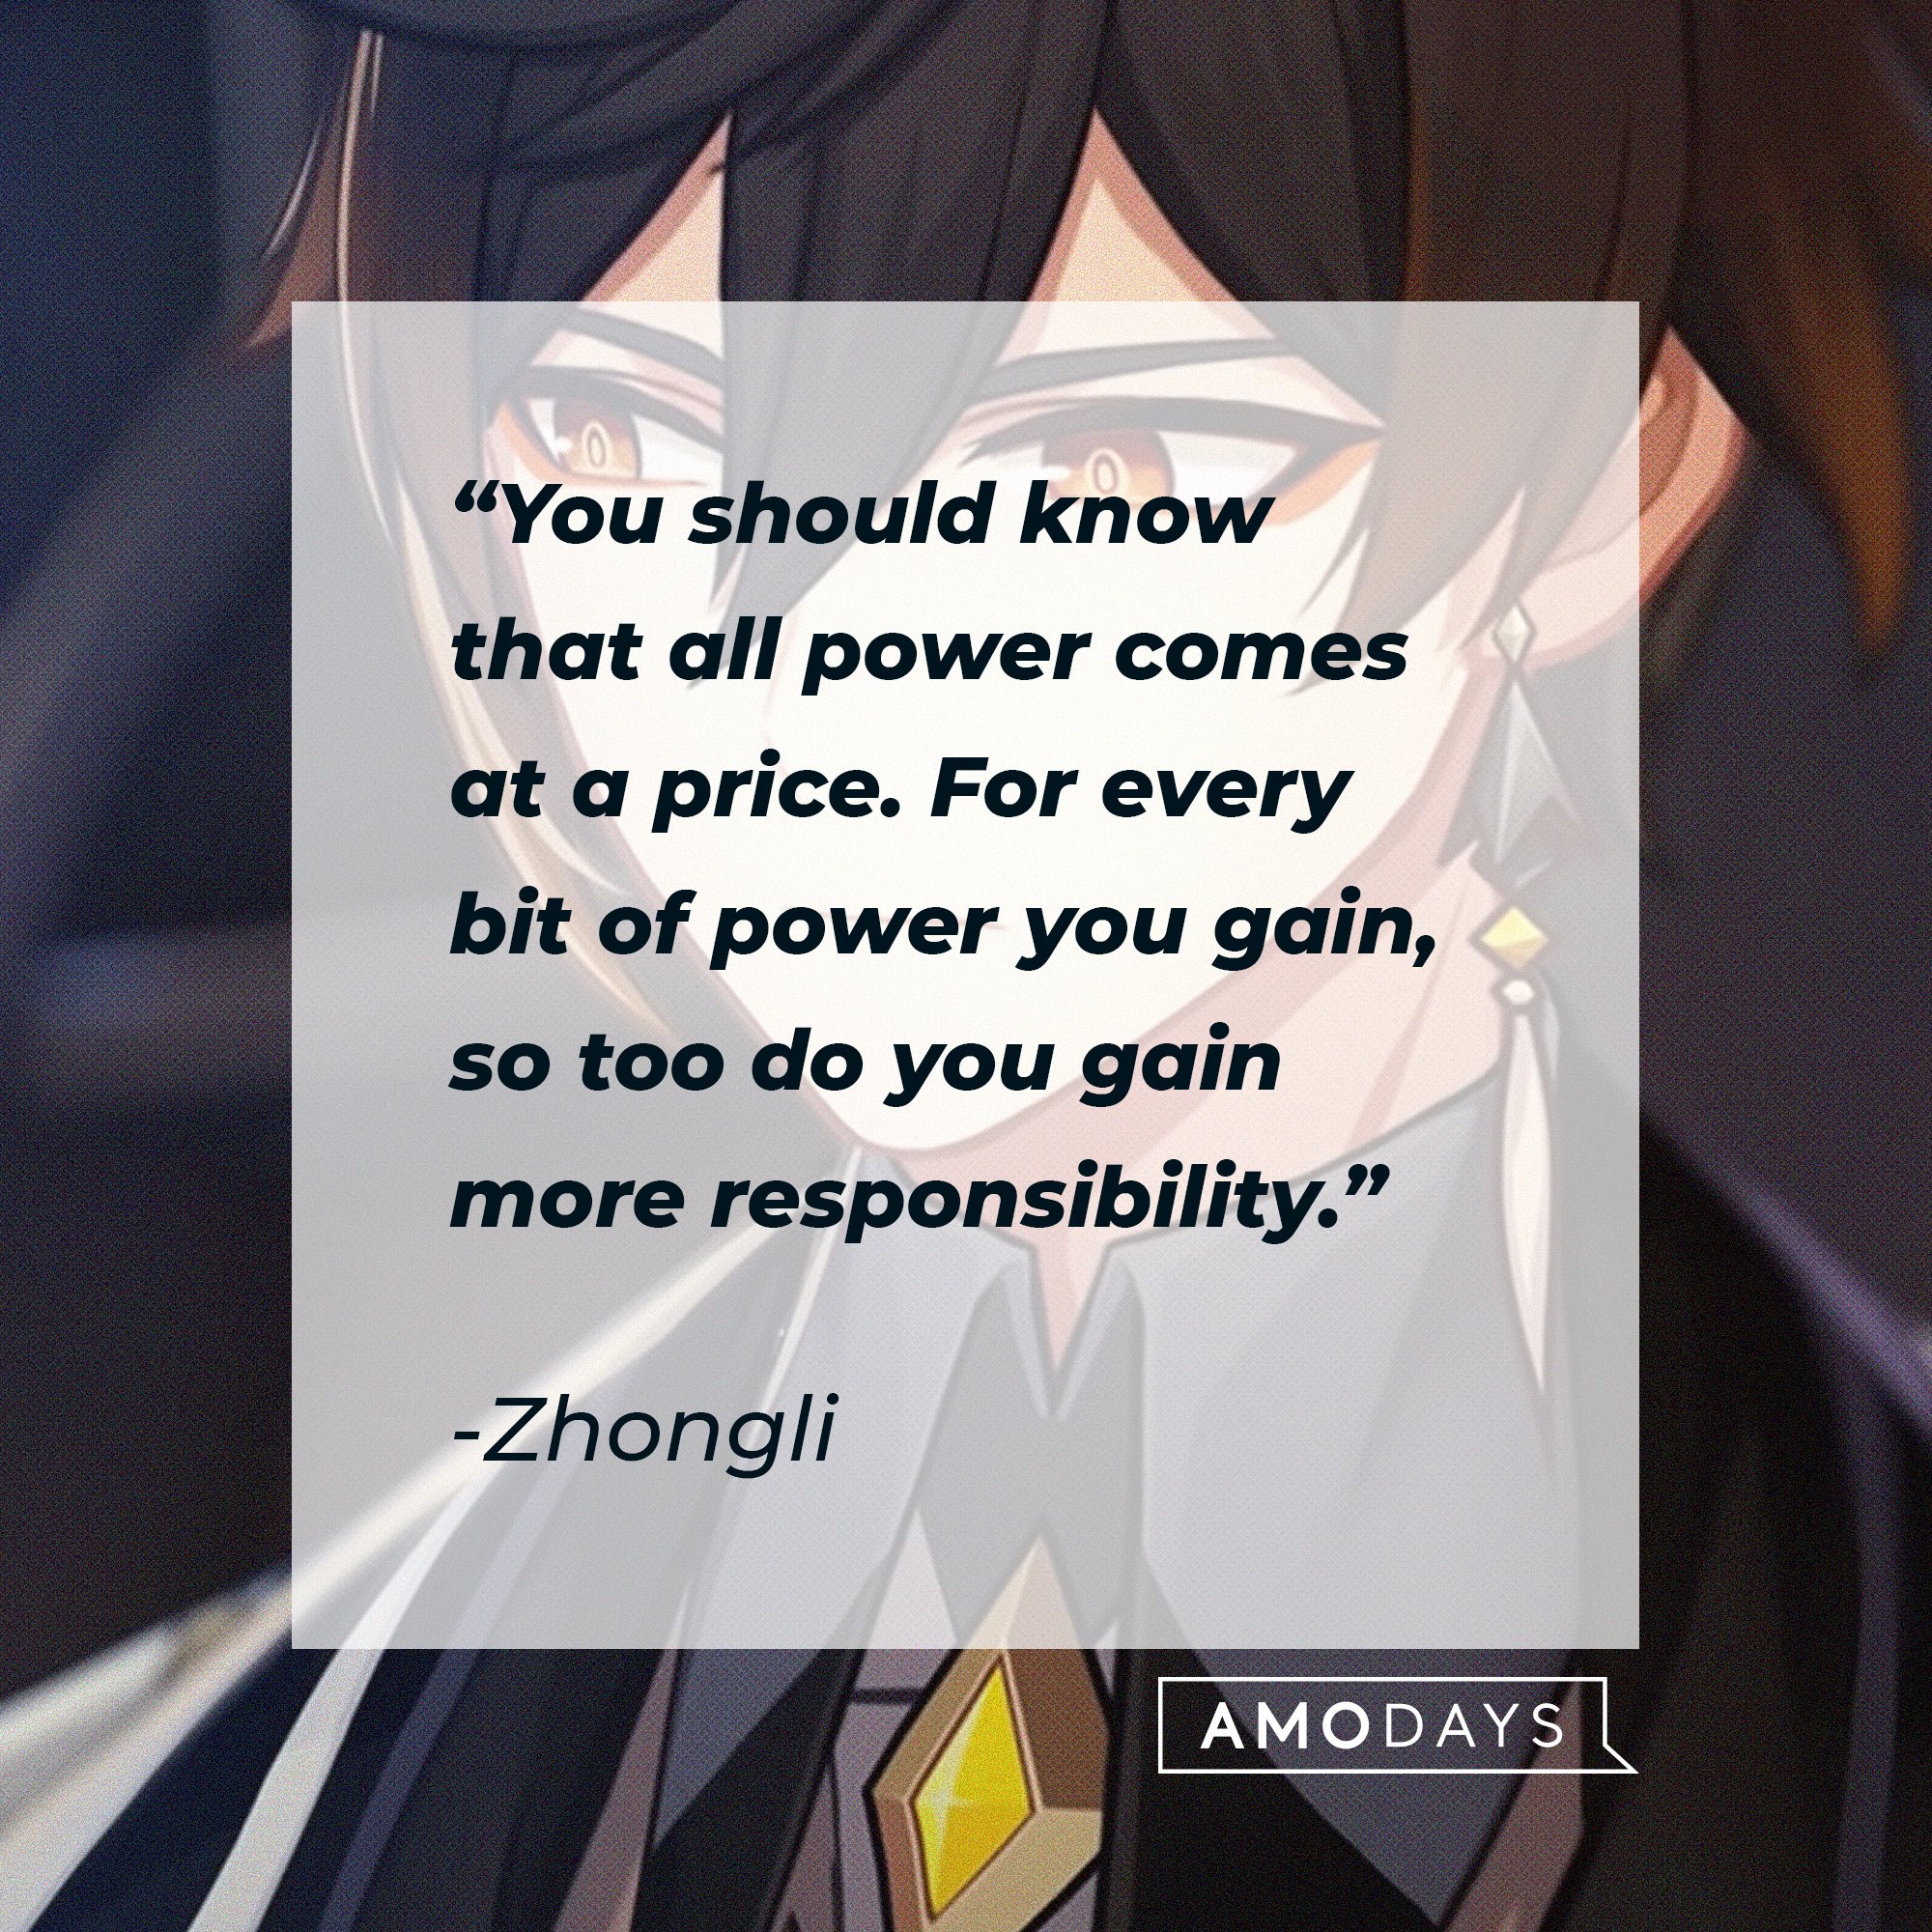  Zhongli’s quote: "You should know that all power comes at a price. For every bit of power you gain, so too do you gain more responsibility." | Image: AmoDays